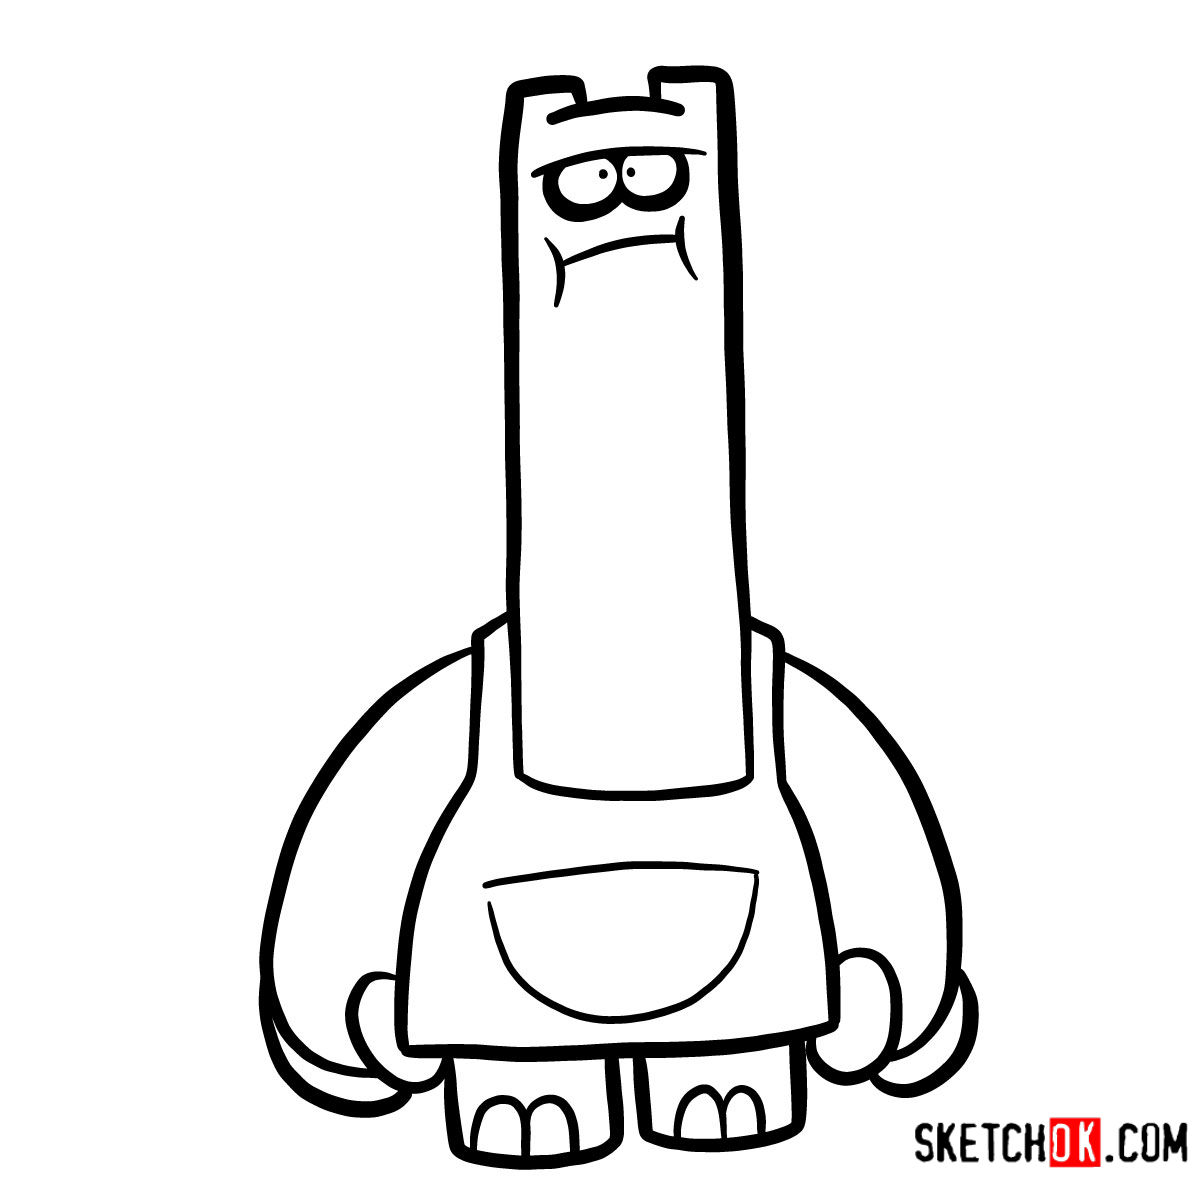 How to draw Shnitzel from Chowder series